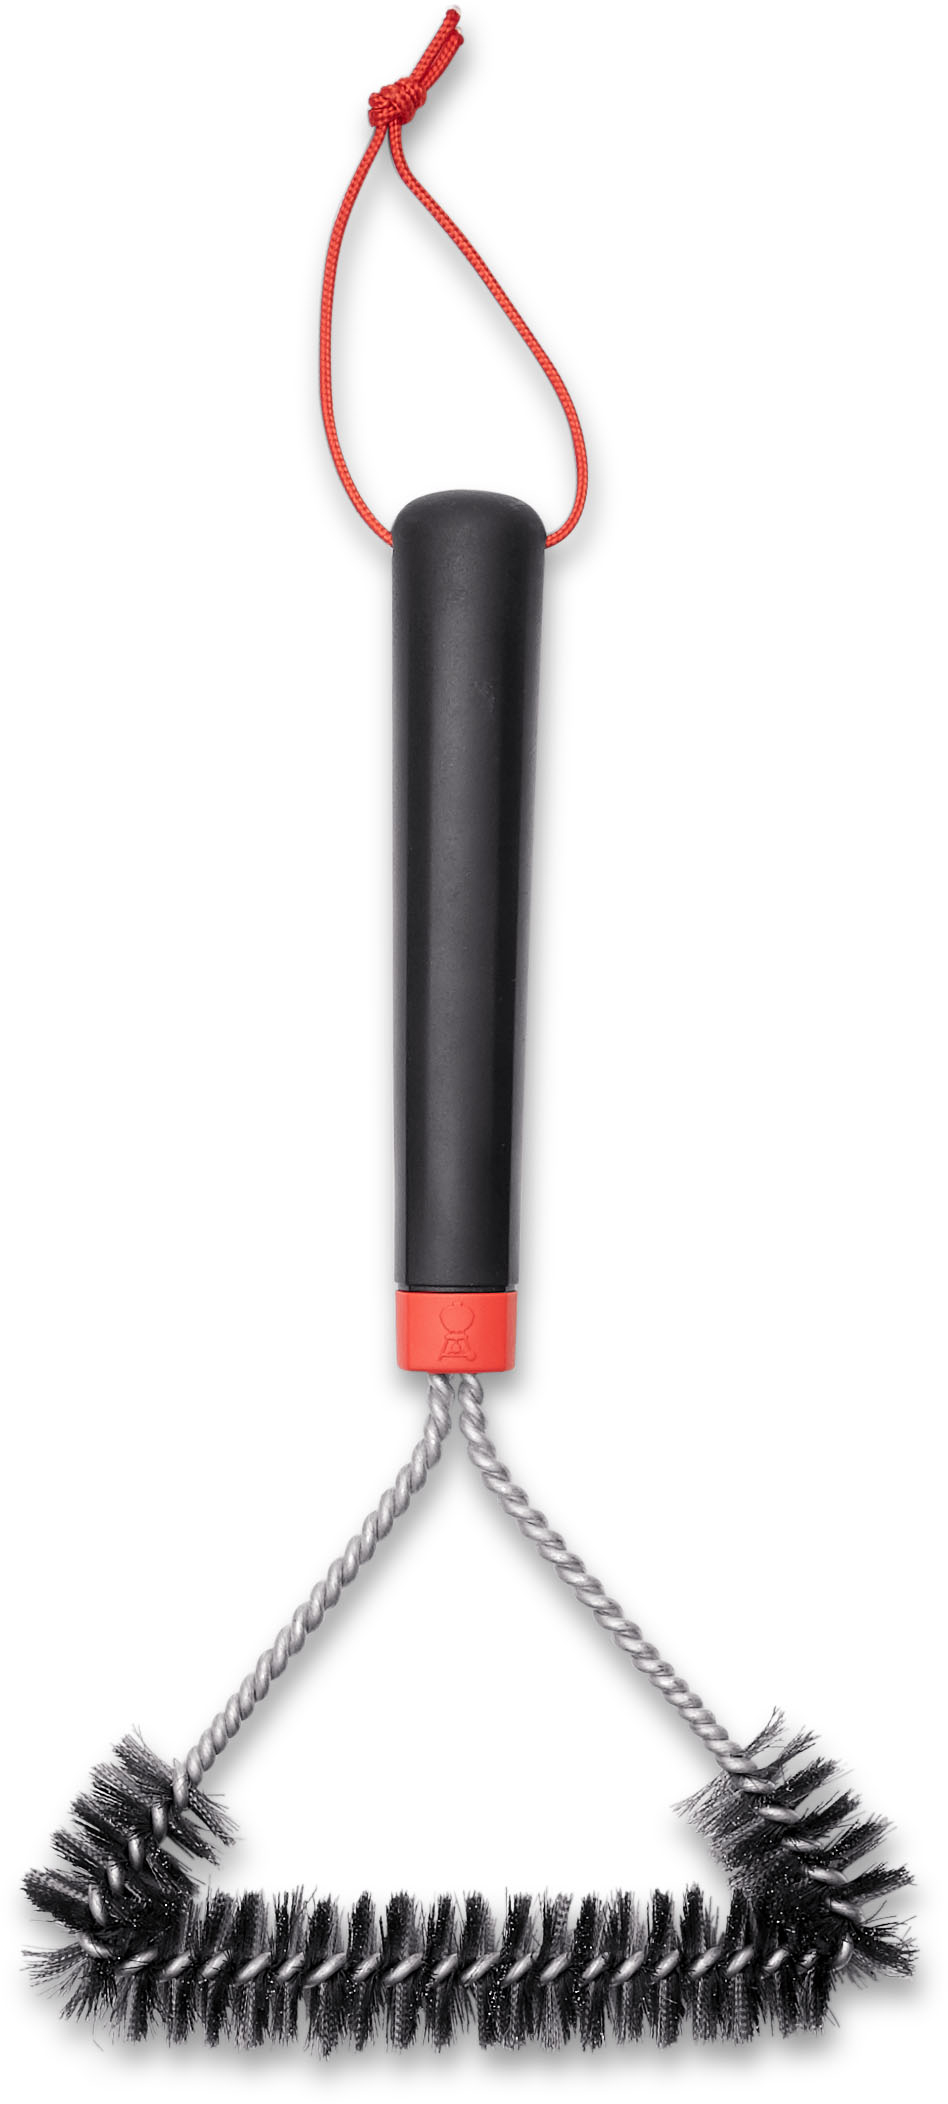 Weber 12-Inch Three-Sided Grill Brush - 6277 : BBQGuys